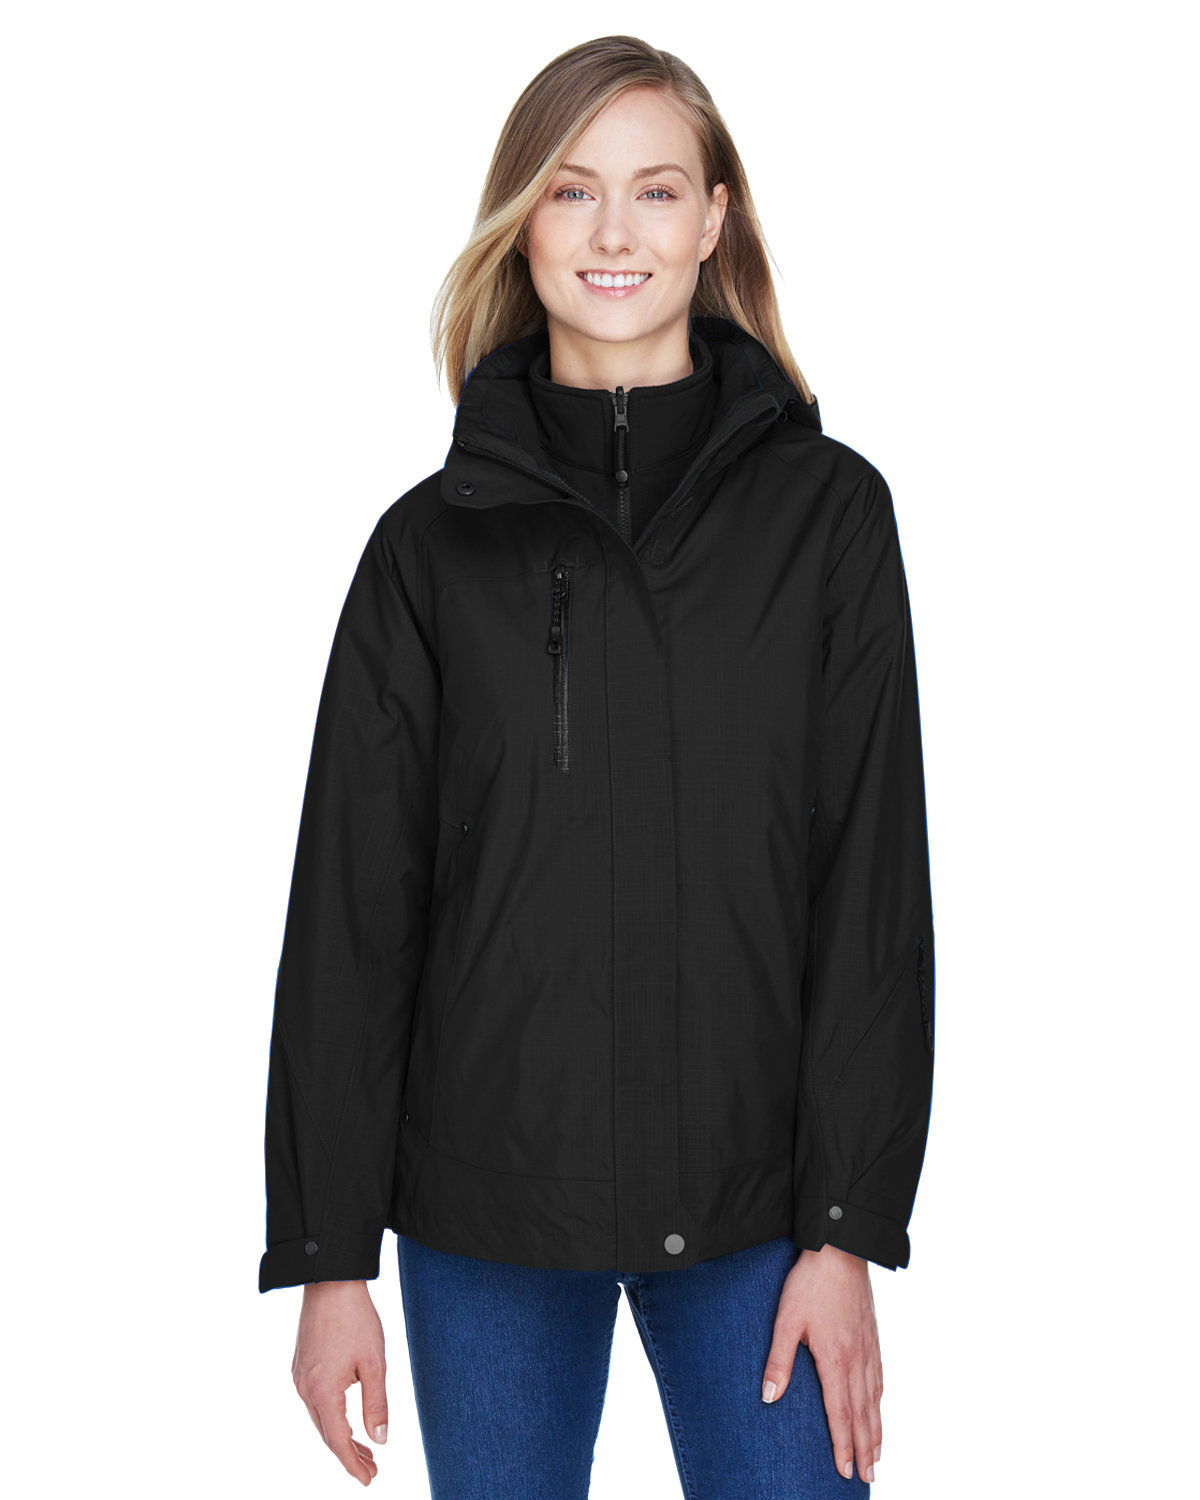 Ladies Caprice 3-In-1 Jacket With Soft Shell Liner-North End